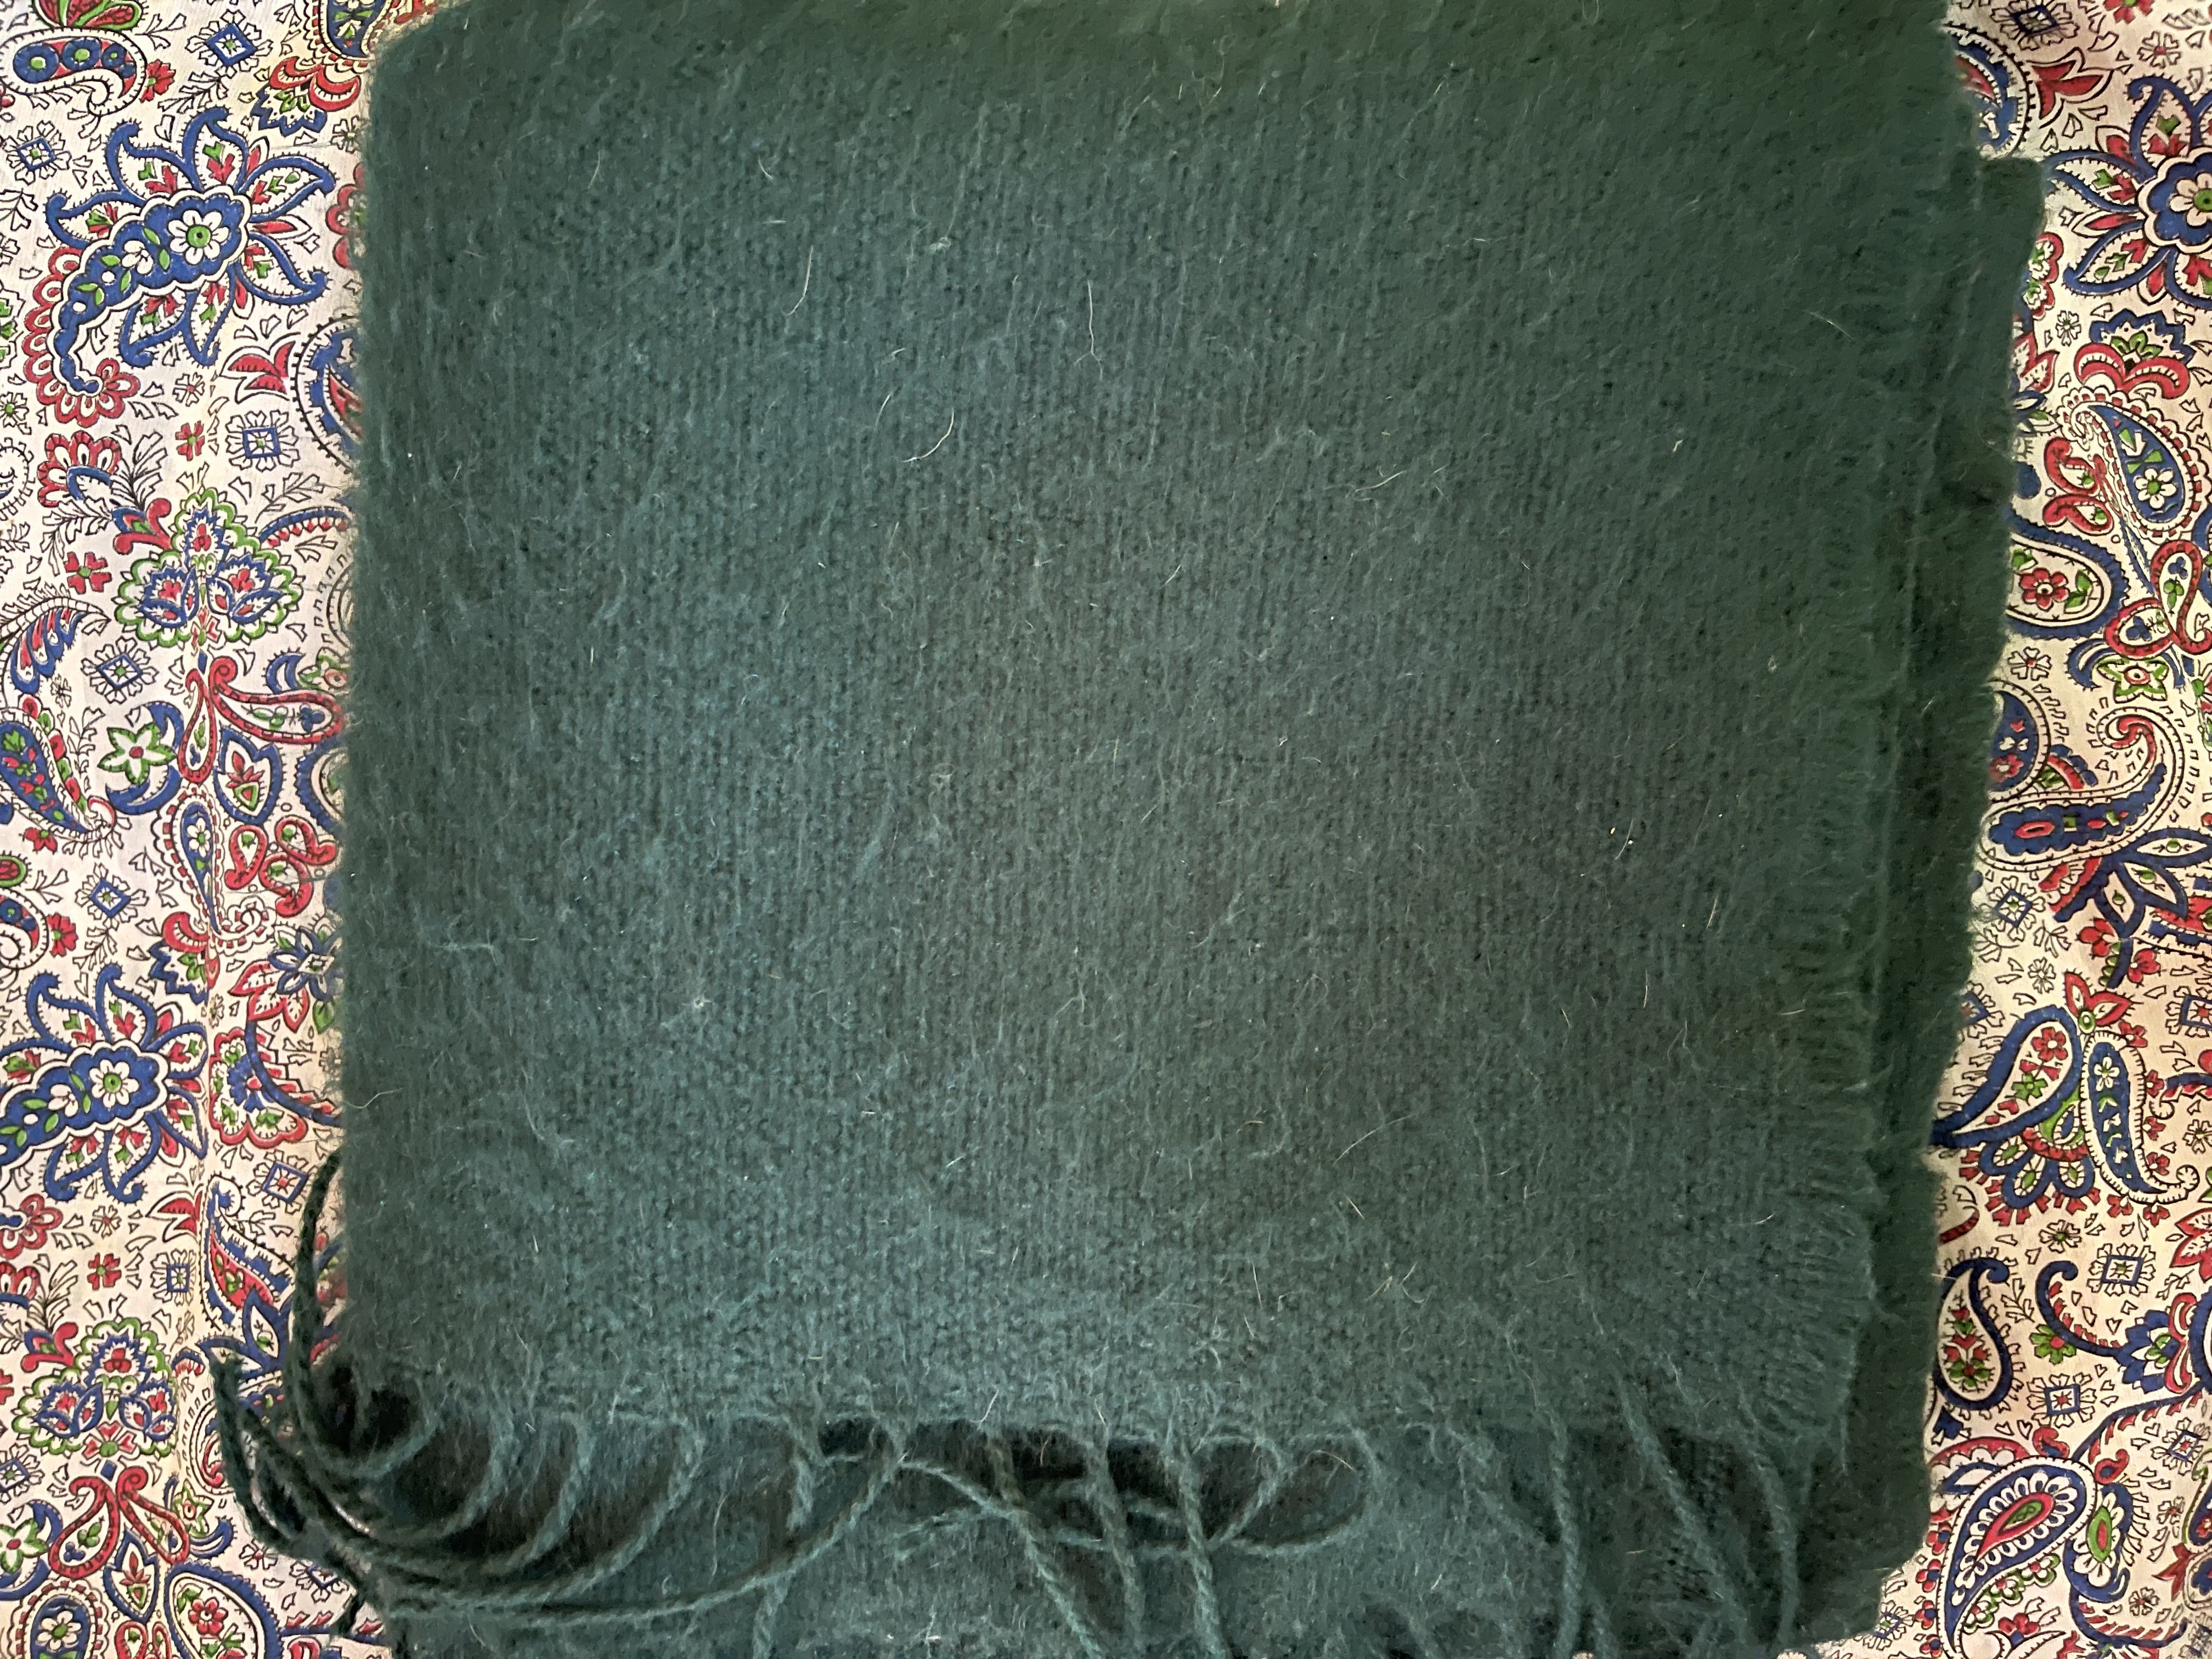 wool scarf after lint removal.